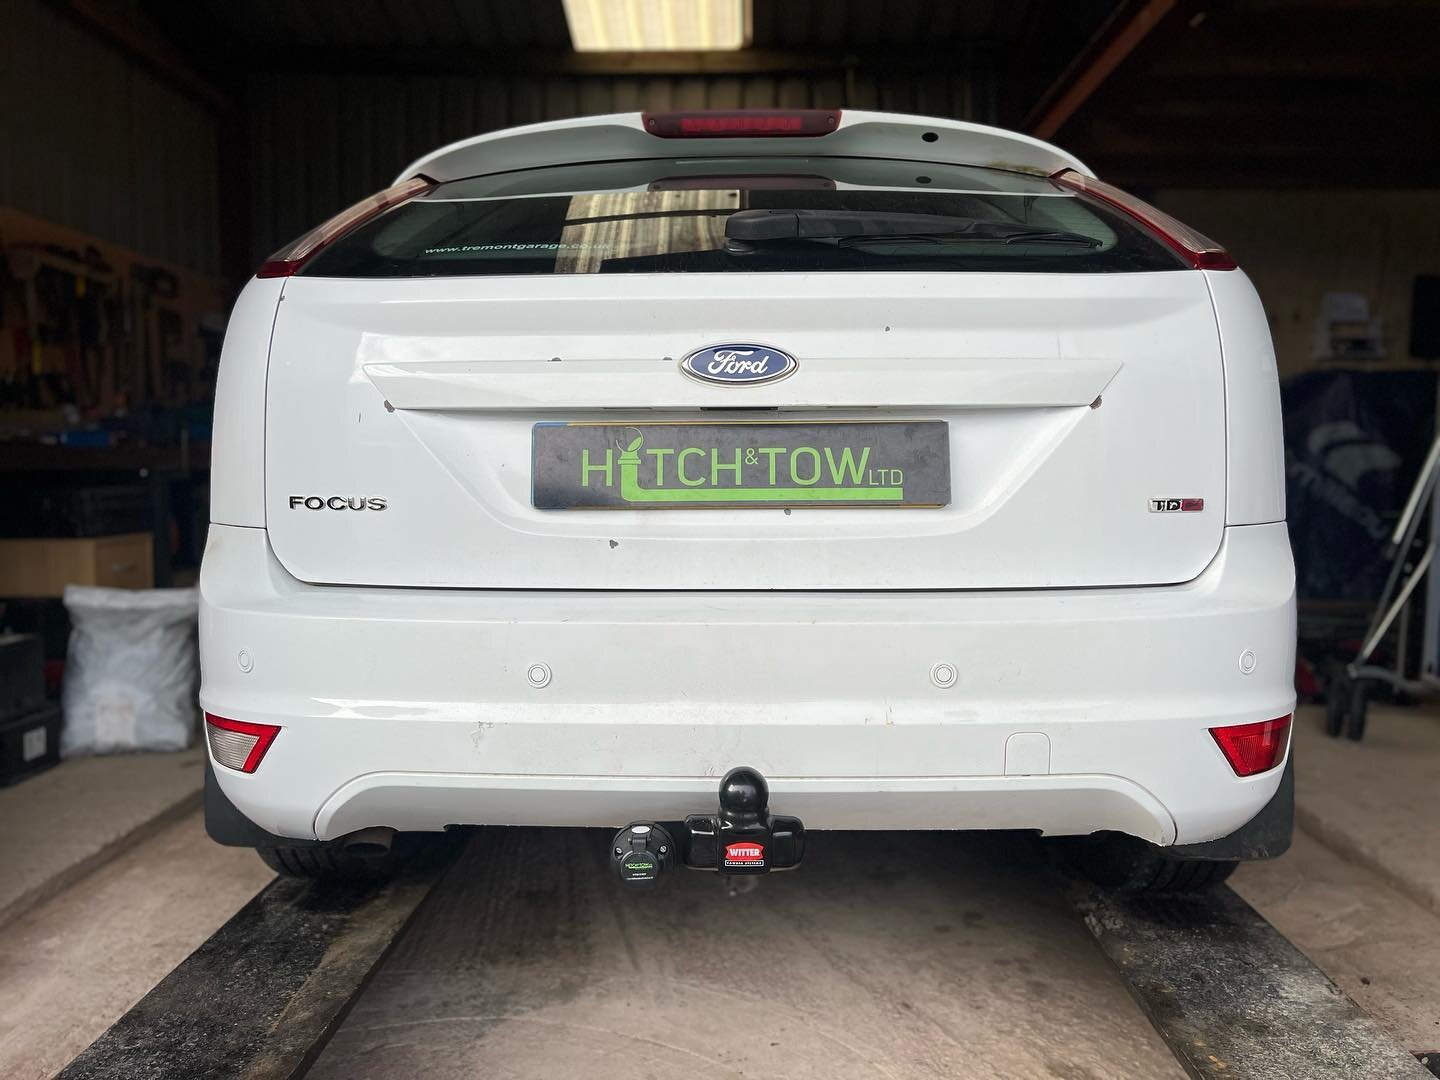 Ford Focus hatchback, fitted with a fixed flange towbar supplied by @witter_towbars with universal single 7pin towing electrics from @rydertowing &amp; @maypoleltd .

www.hitchandtowlimited.co.uk 

Customer was able to get us inside and we were able 